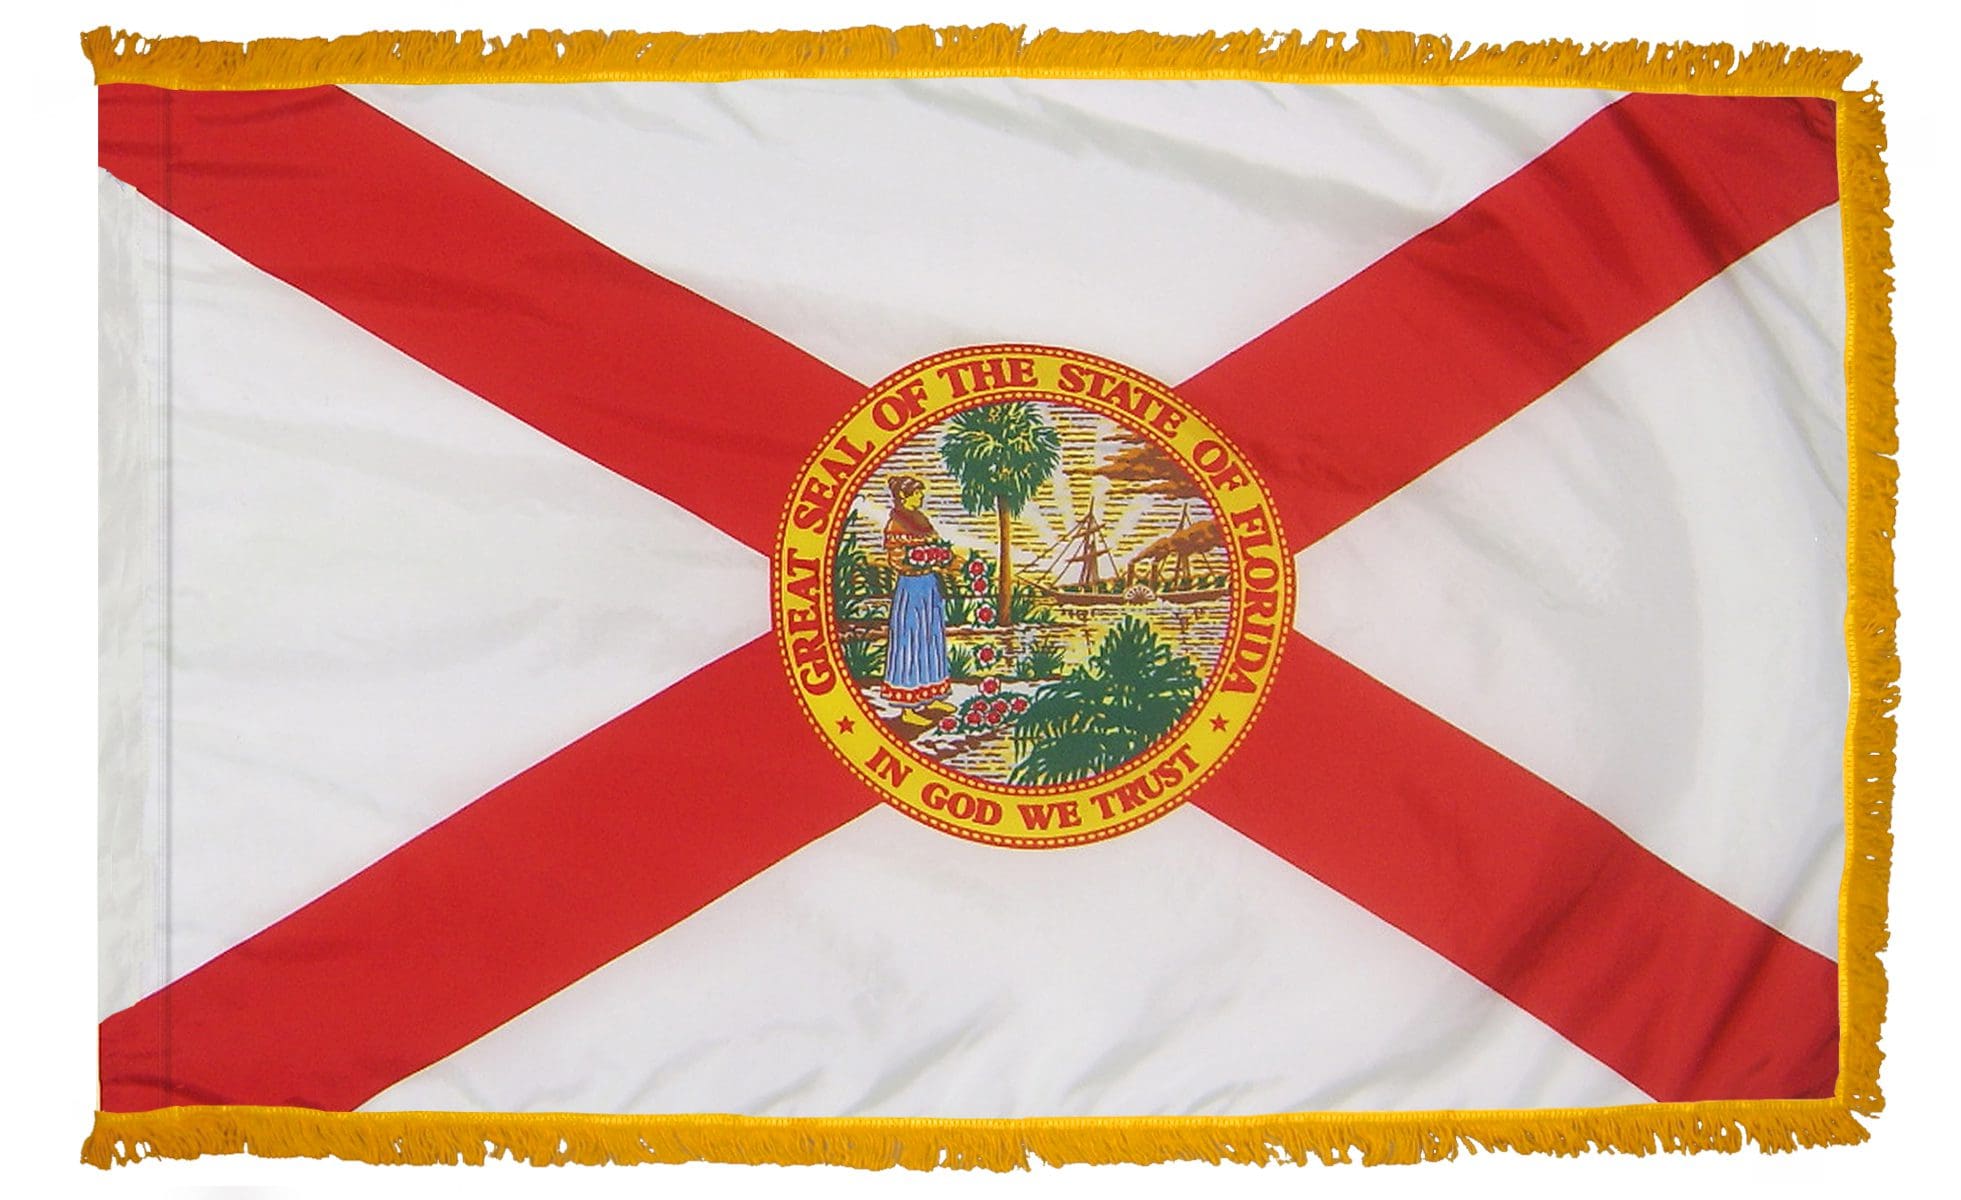 Florida State Flag 3x5 or 4x6 ft. (fringed)